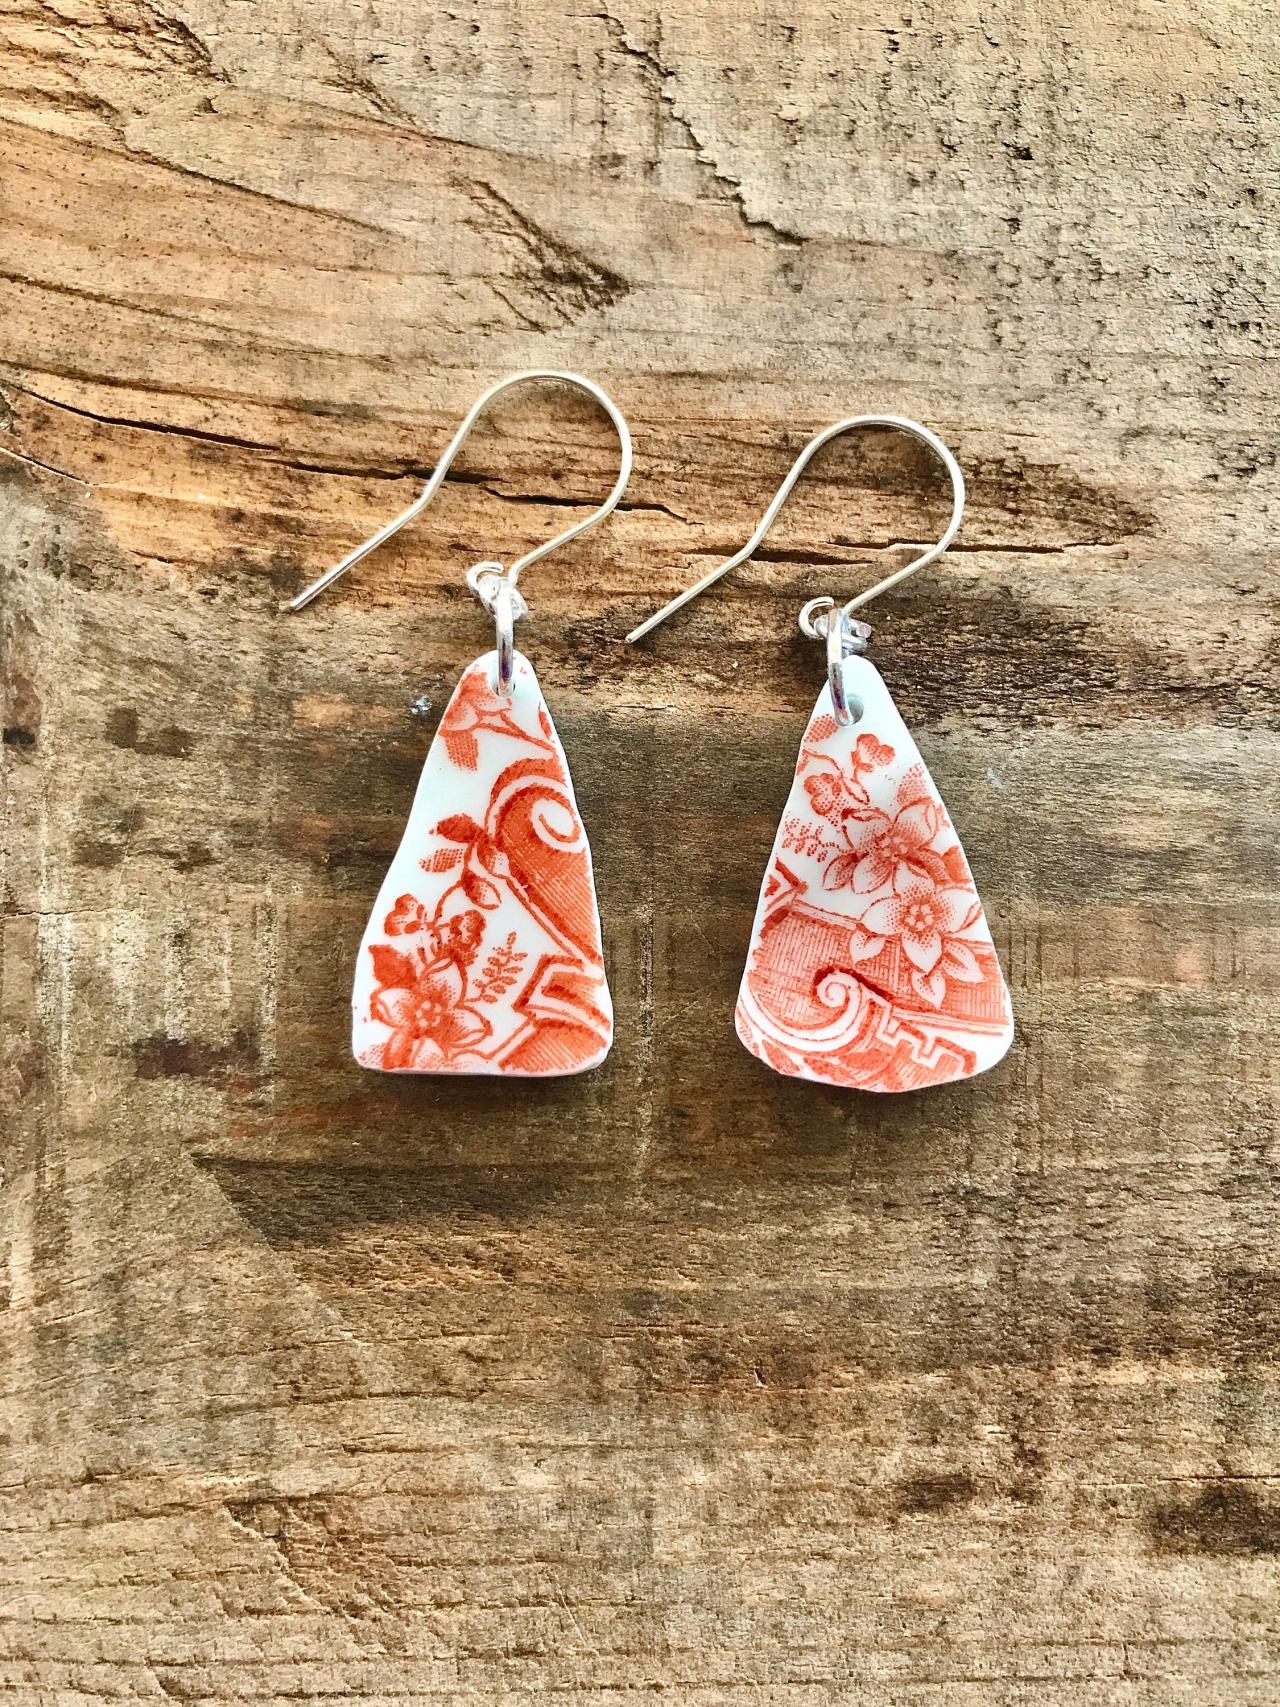 Gorgeous Orange Triangle Vintage Recycled Broken China Earrings With Sterling Silver Wires.